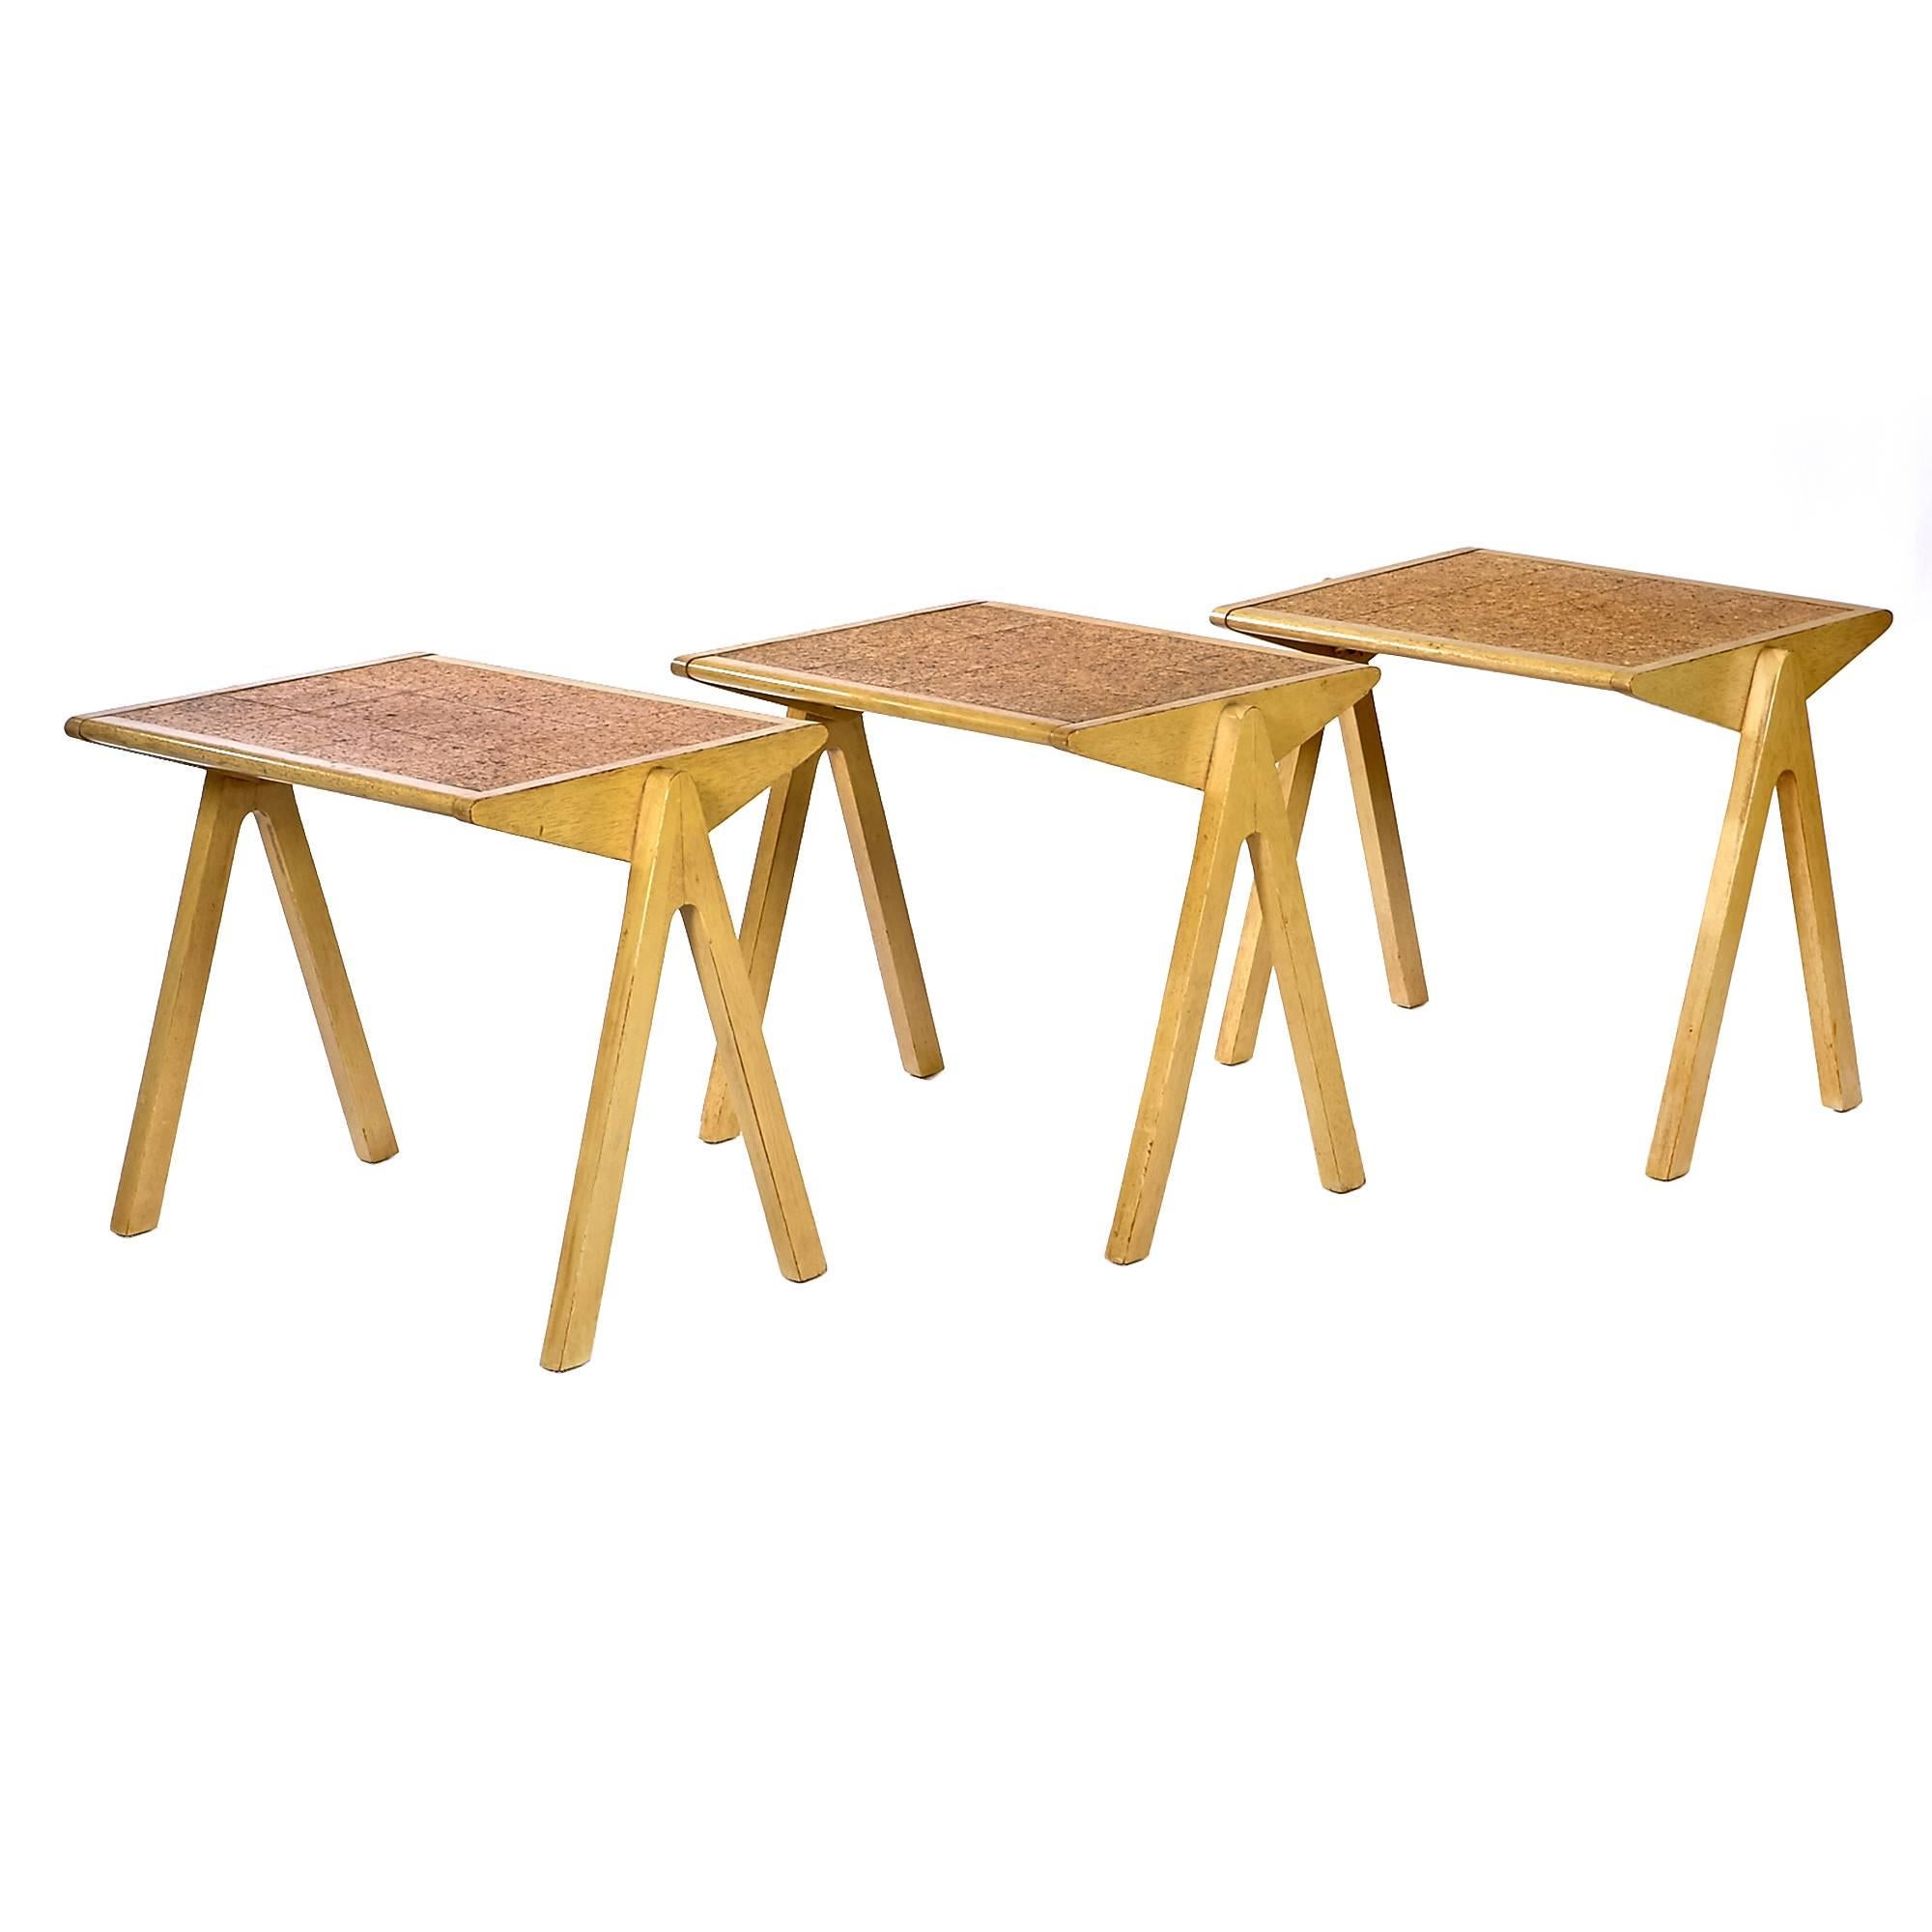 Rare set of three stacking tables with bleached mahogany wood, cork tops and splayed compass-style legs. Tables are designed by Bob Roukema for Jon Jansen of New Zealand, 1953.